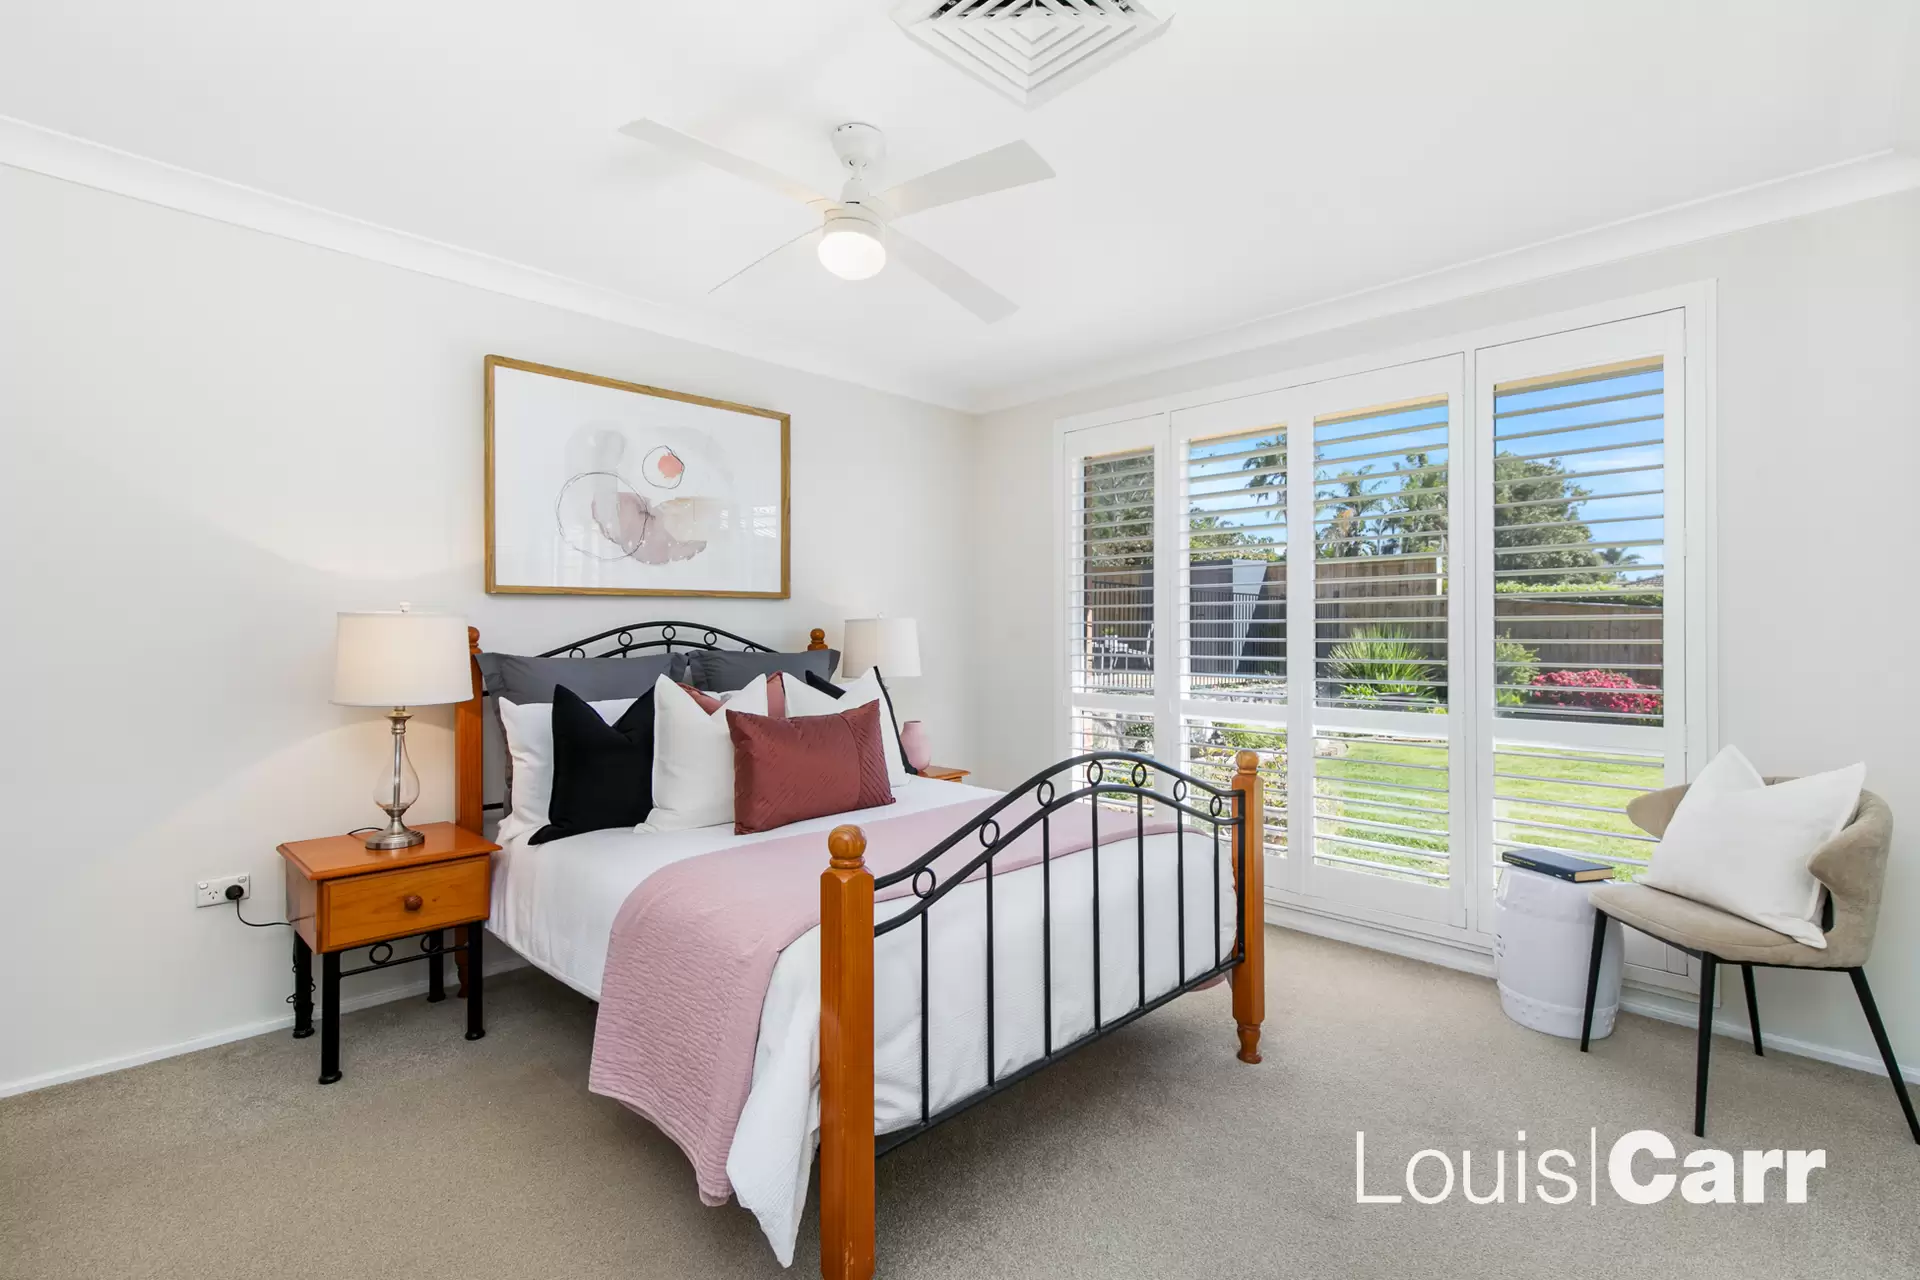 Photo #9: 32 Carob Place, Cherrybrook - Sold by Louis Carr Real Estate